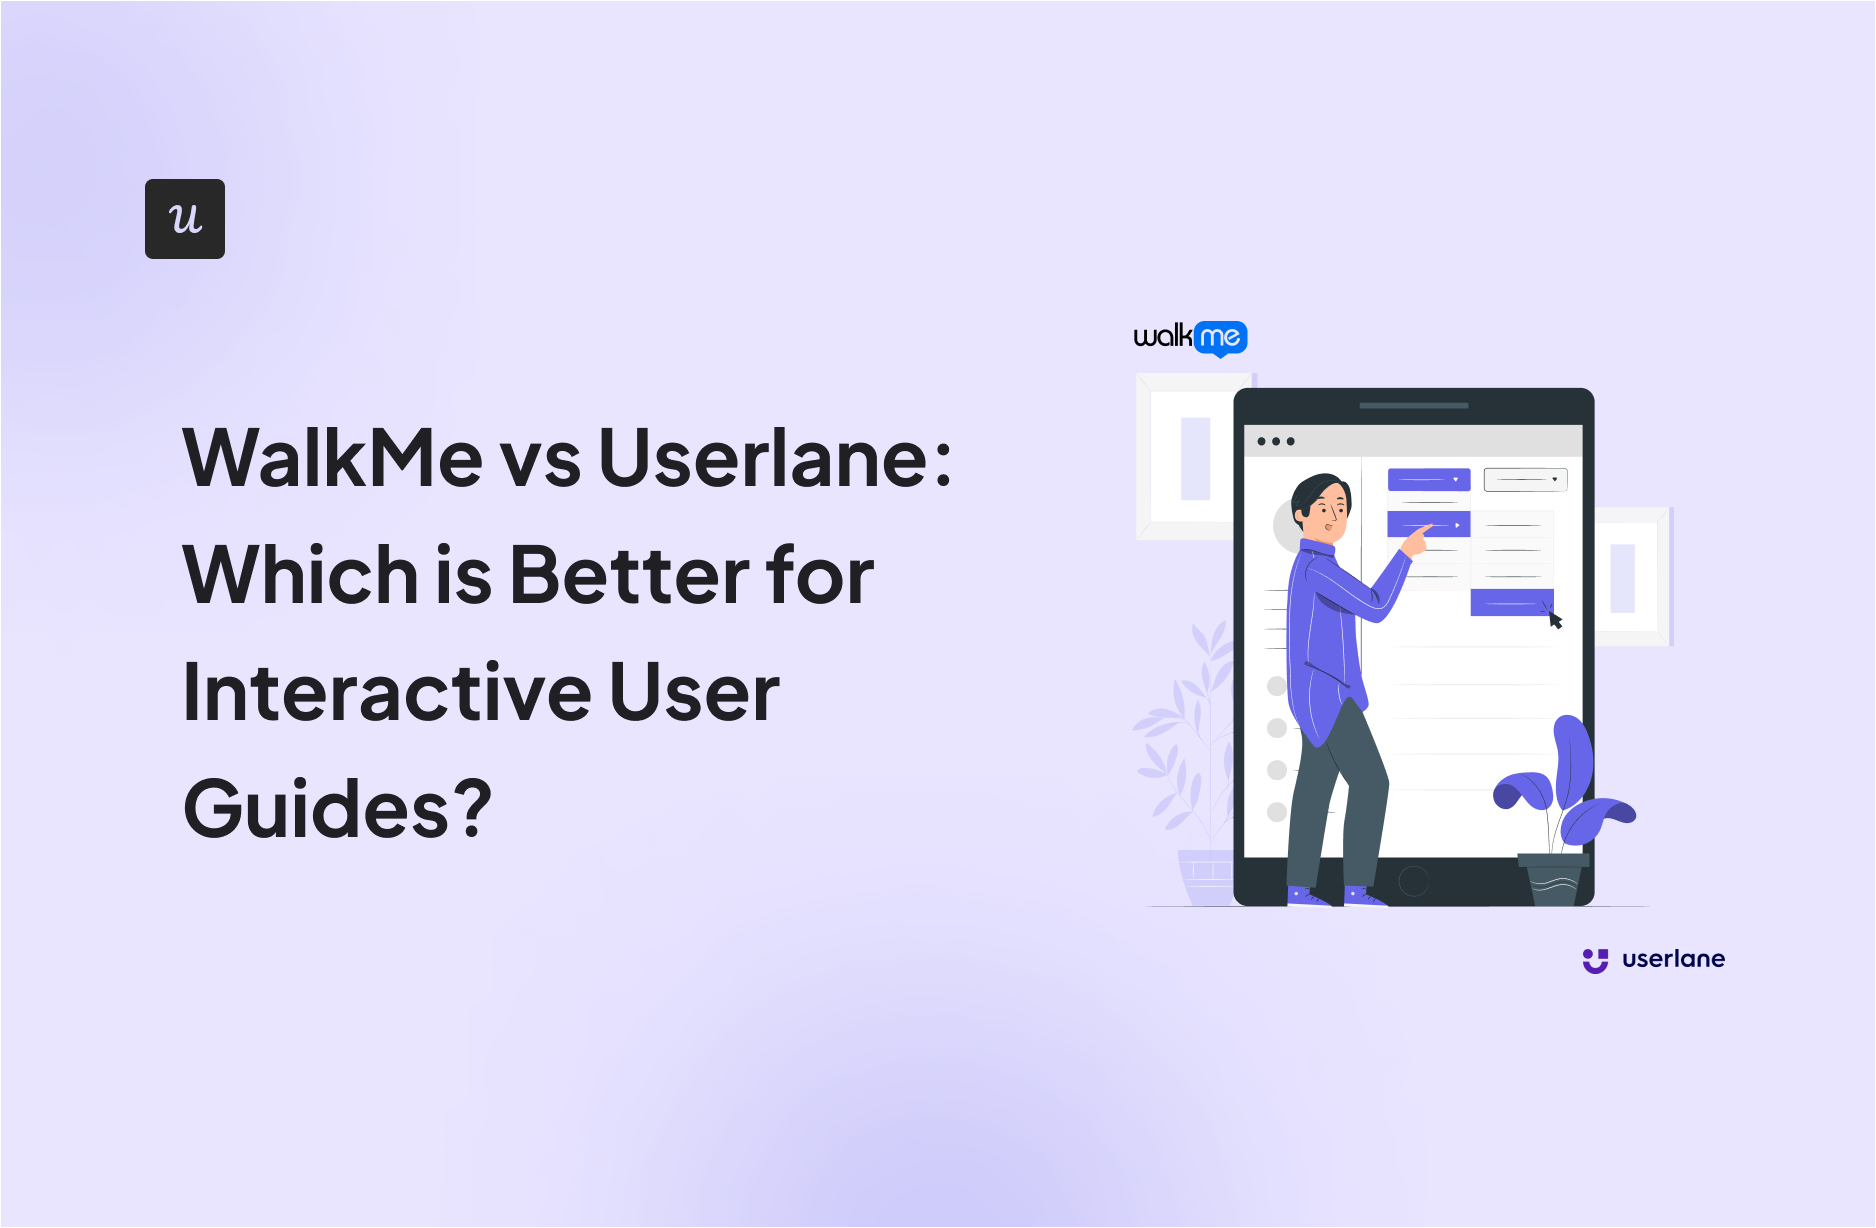 WalkMe vs Userlane: Which is Better for Interactive User Guides?